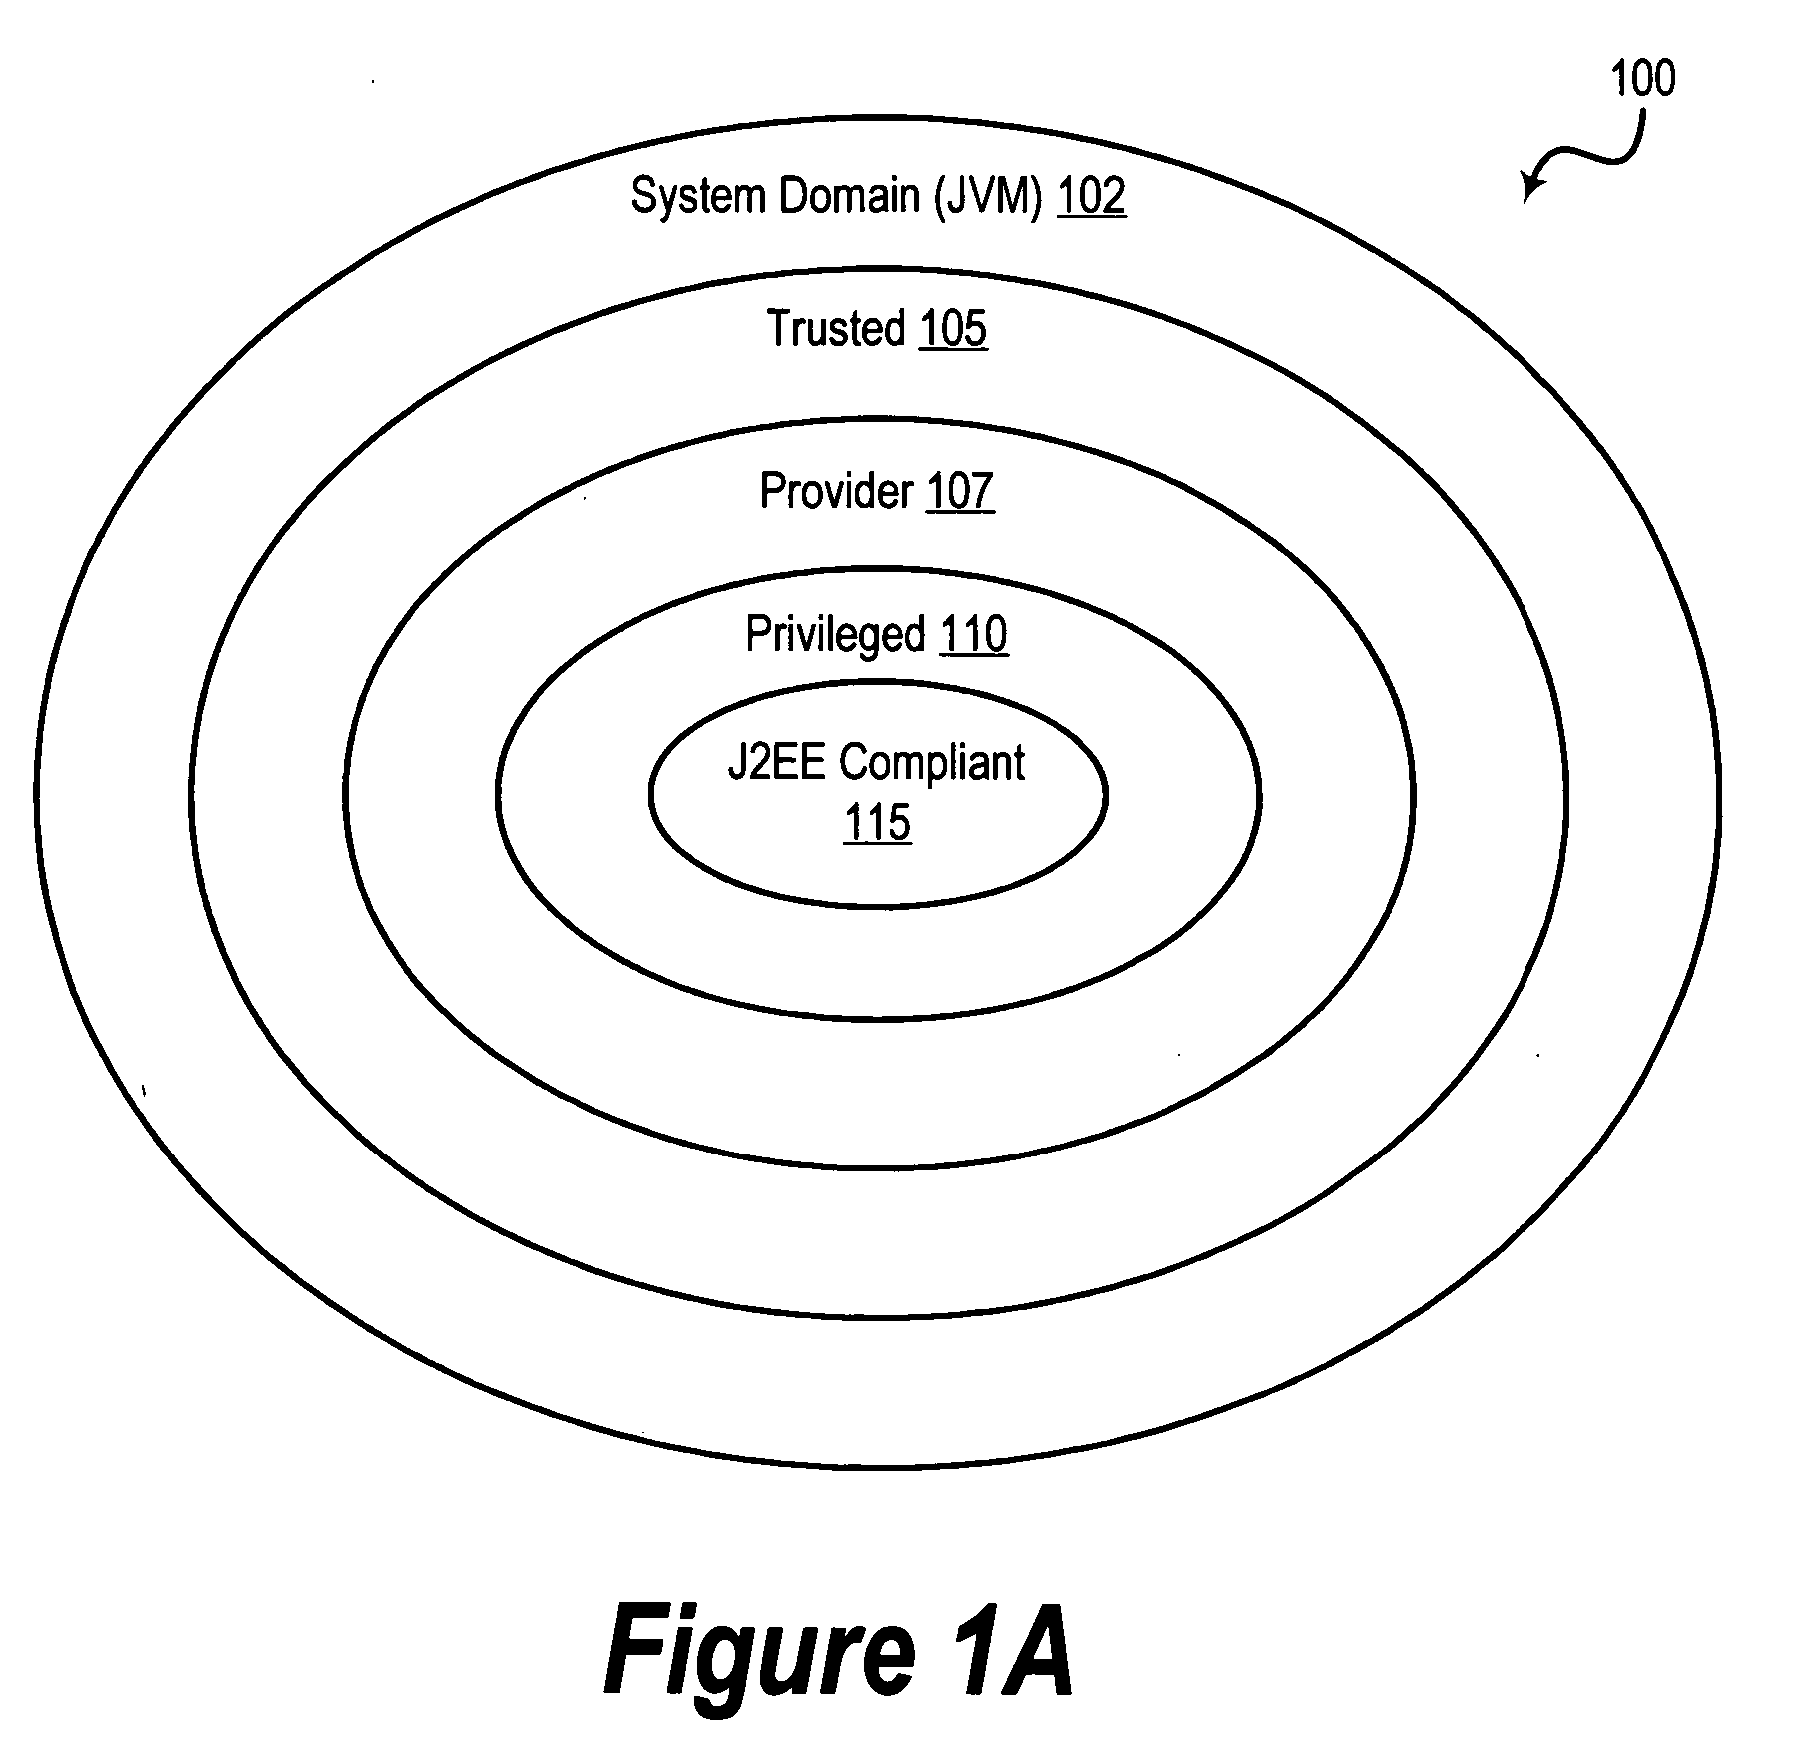 System and method for using security levels to simplify security policy management